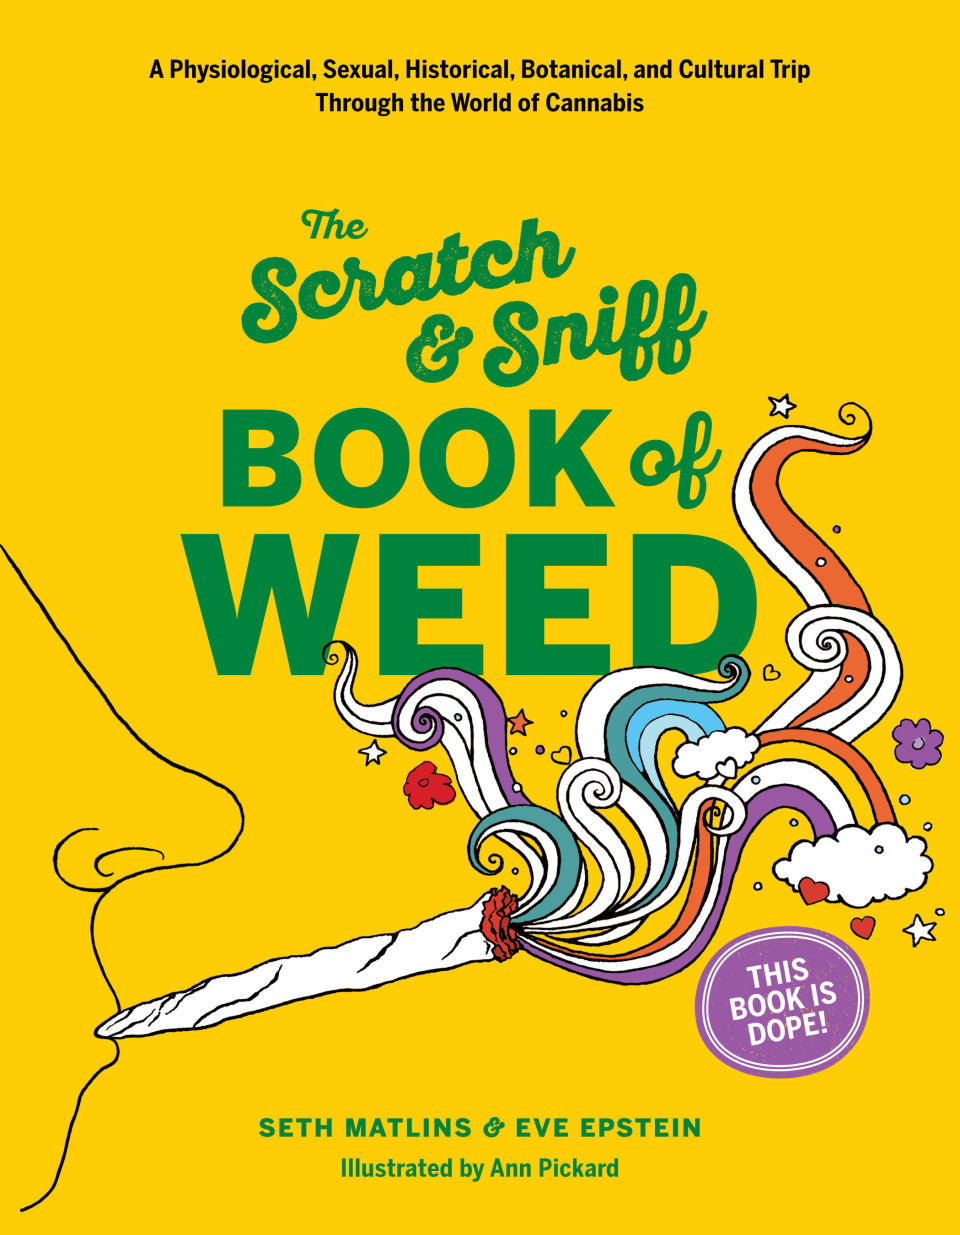 Pot is becoming legal in so many places that Dad might need a refresher on the many facets of marijuana. This <a href="http://www.abramsbooks.com/product/scratch-sniff-book-of-weed_9781419724527/" target="_blank">scratch and sniff book</a> should give him a sense of the world of weed. If your dad is Jeff Sessions, send him two copies.<br />